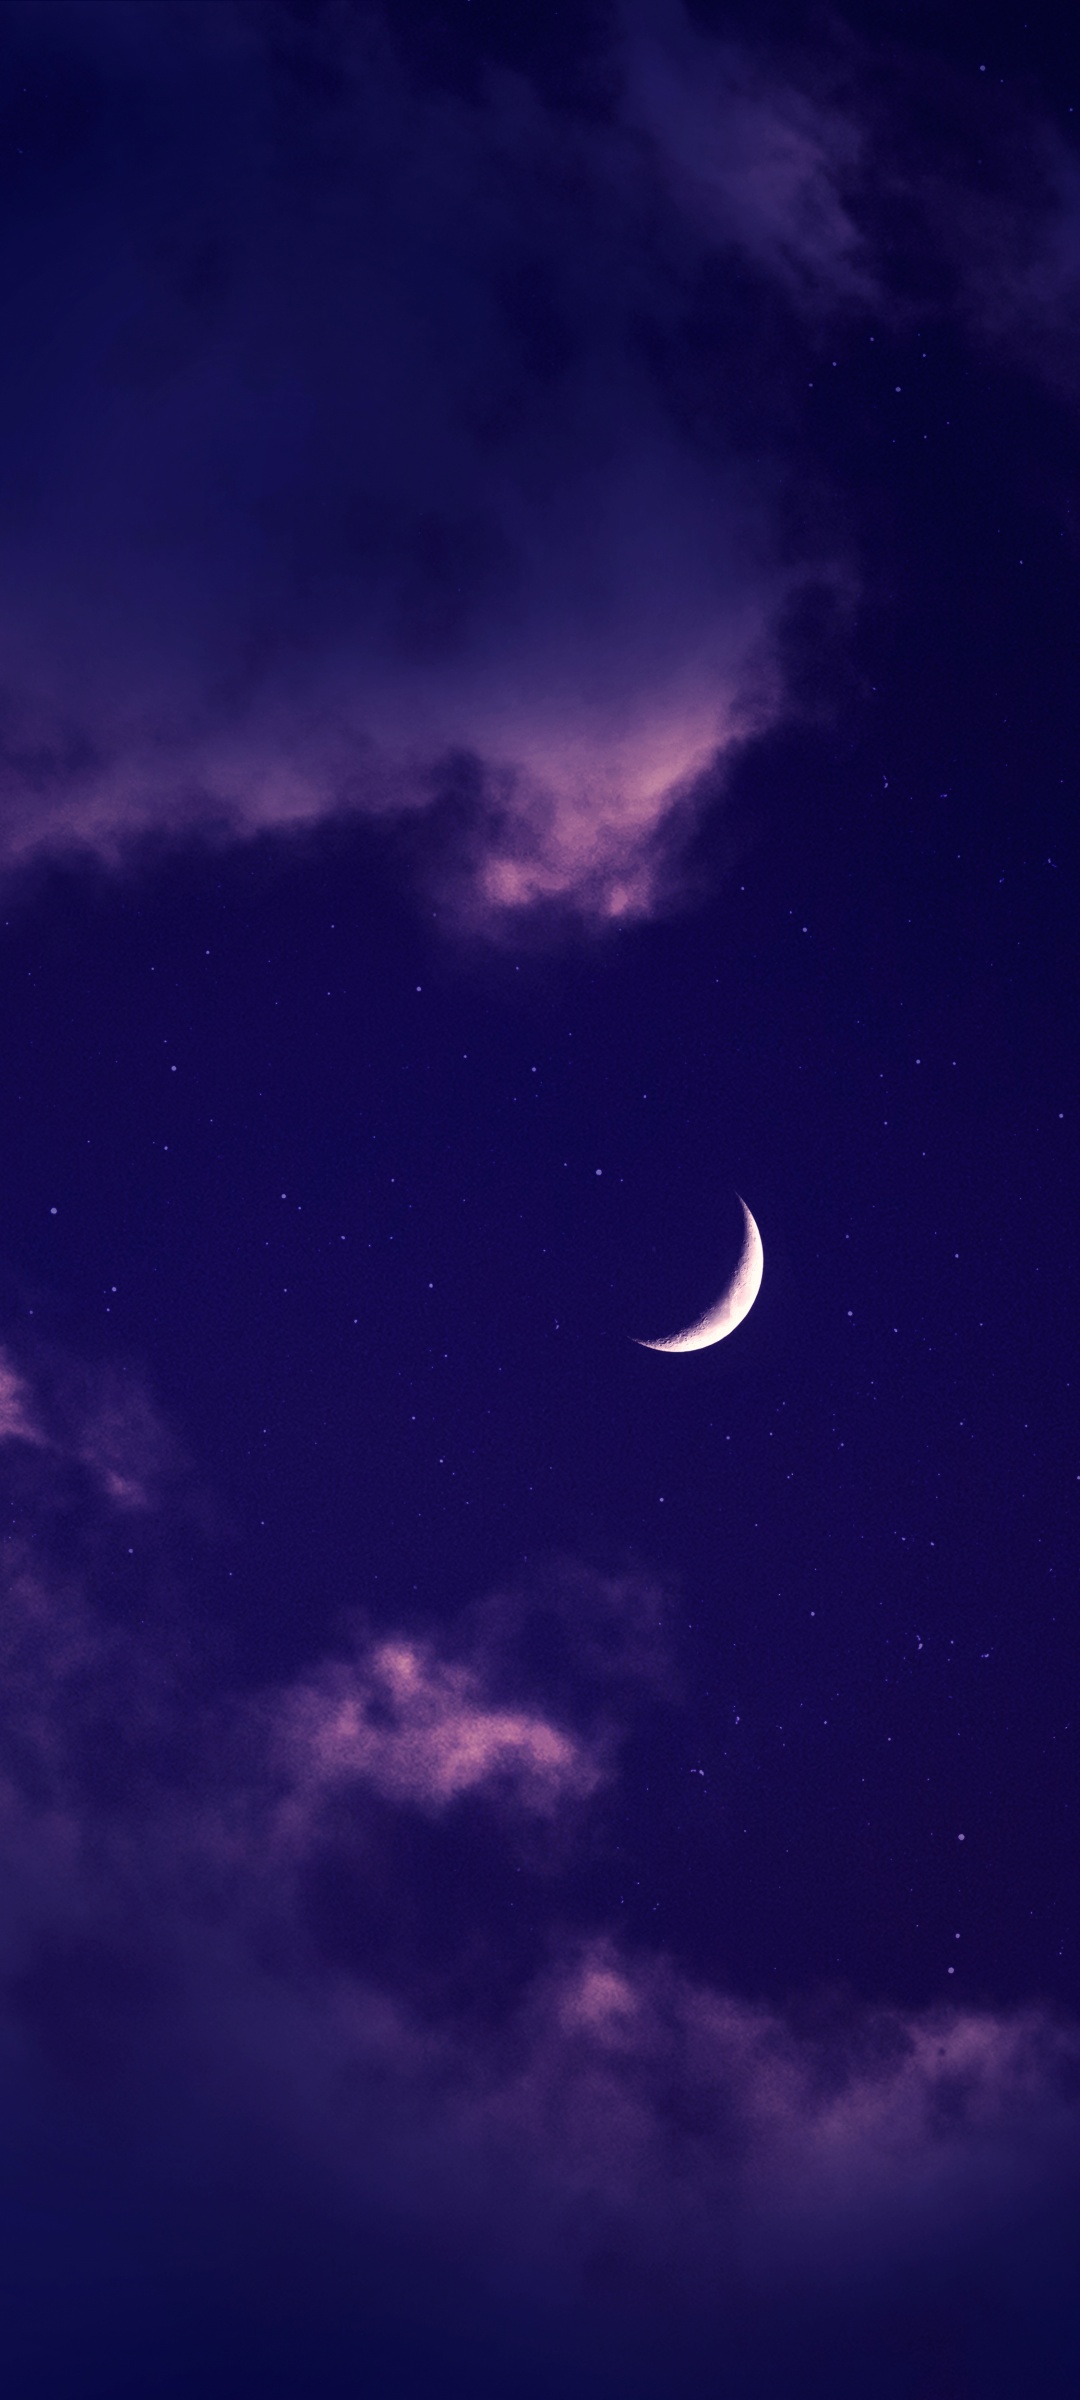 Aesthetic Night Sky Wallpapers Background Wallpaper Image For Free Download   Pngtree